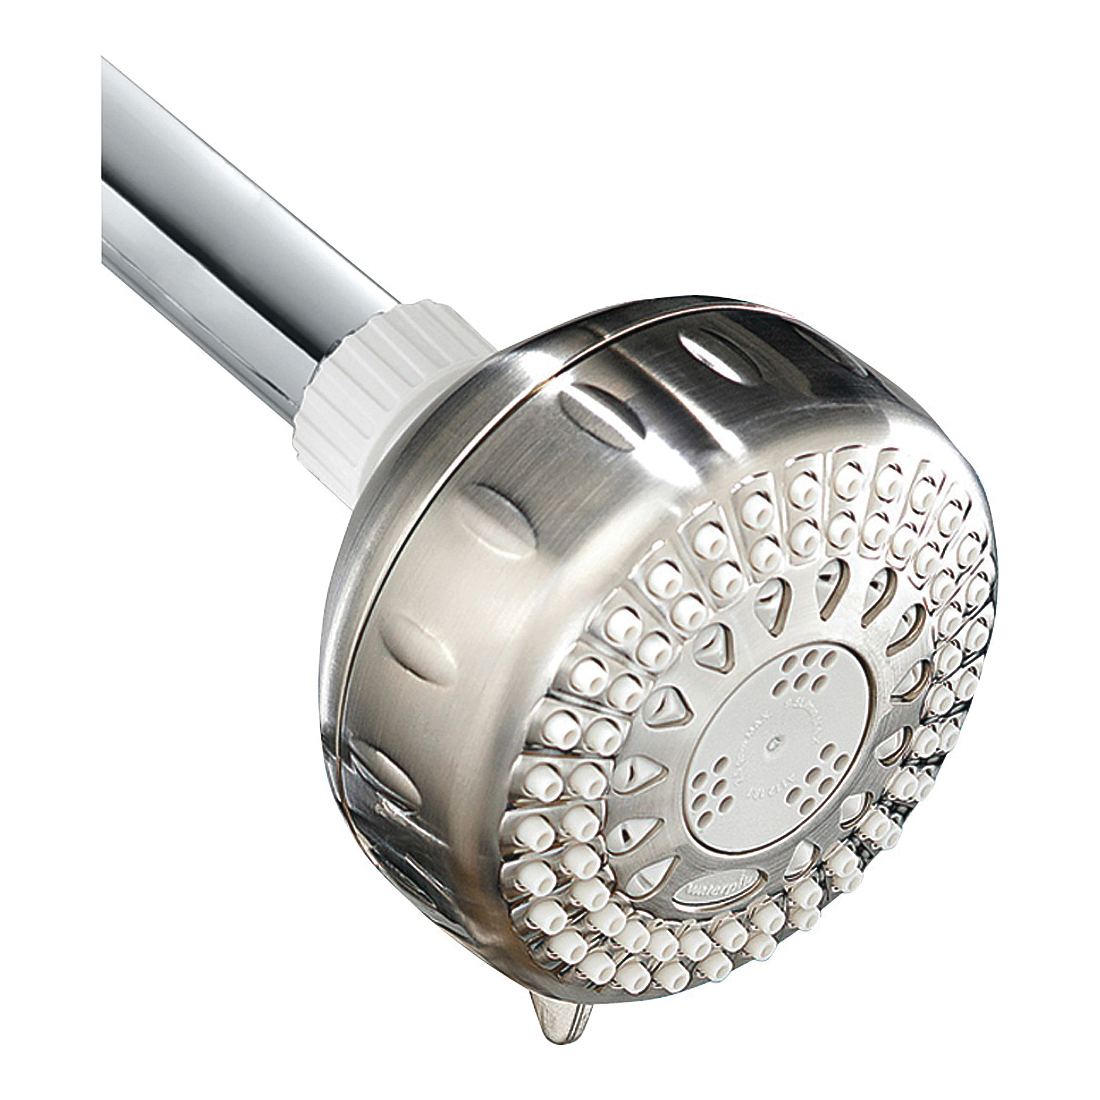 TRS-529T Shower Head, 2 gpm, Plastic, Brushed Nickel, 3-1/4 in Dia